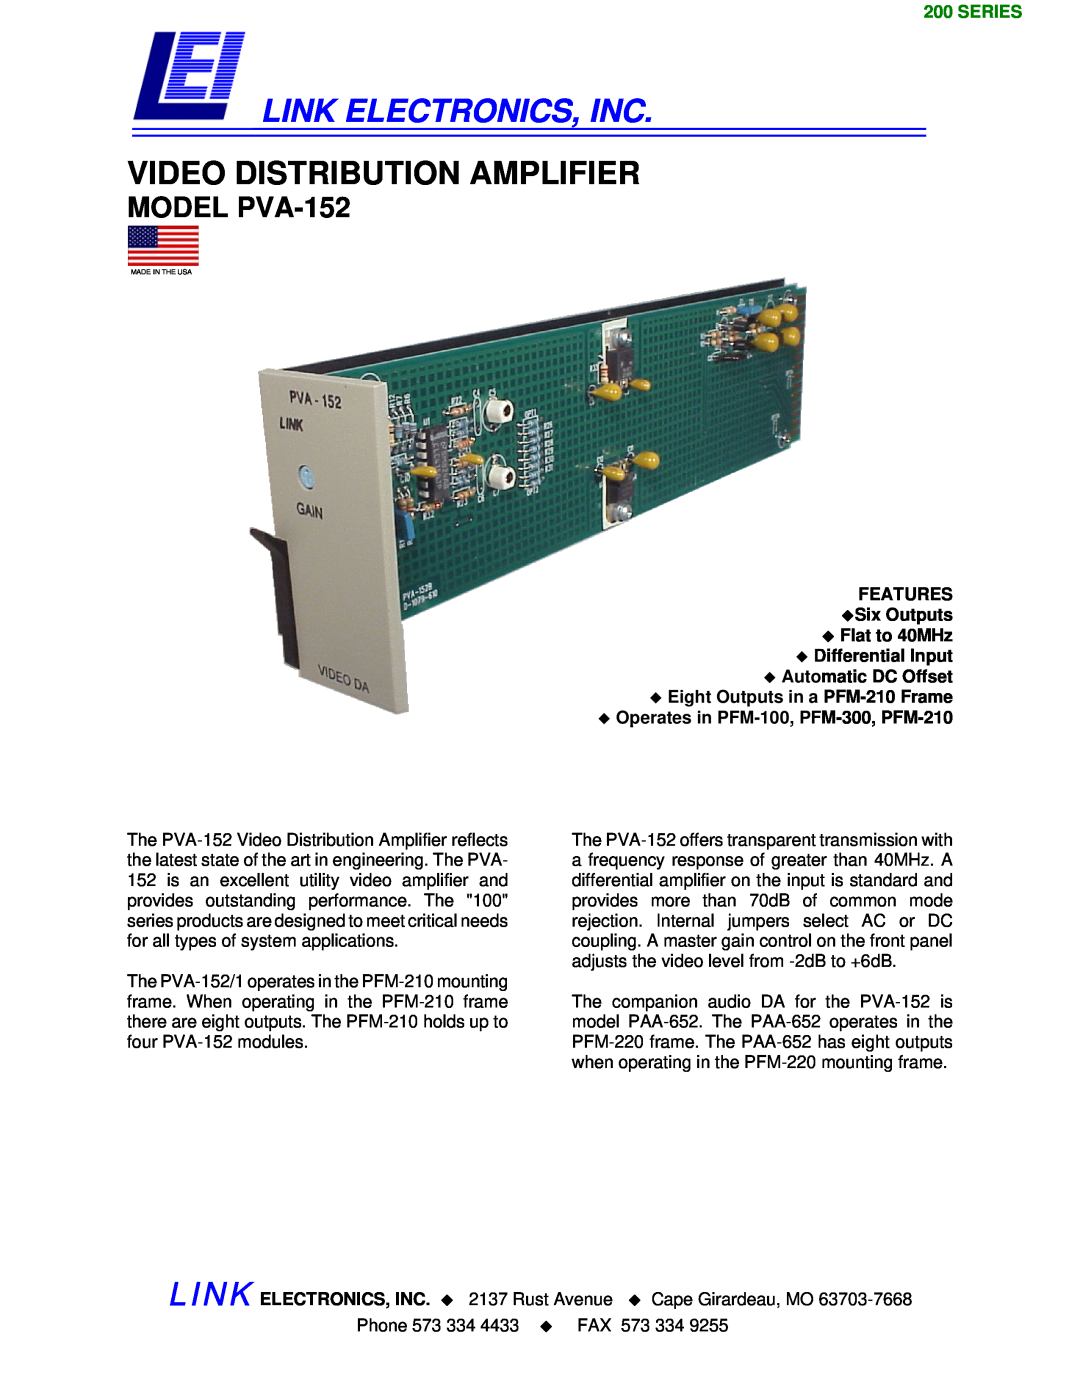 Link electronic PVA-152 manual Features, ‹Six Outputs ‹ Flat to 40MHz ‹ Differential Input, Link Electronics, Inc, Series 